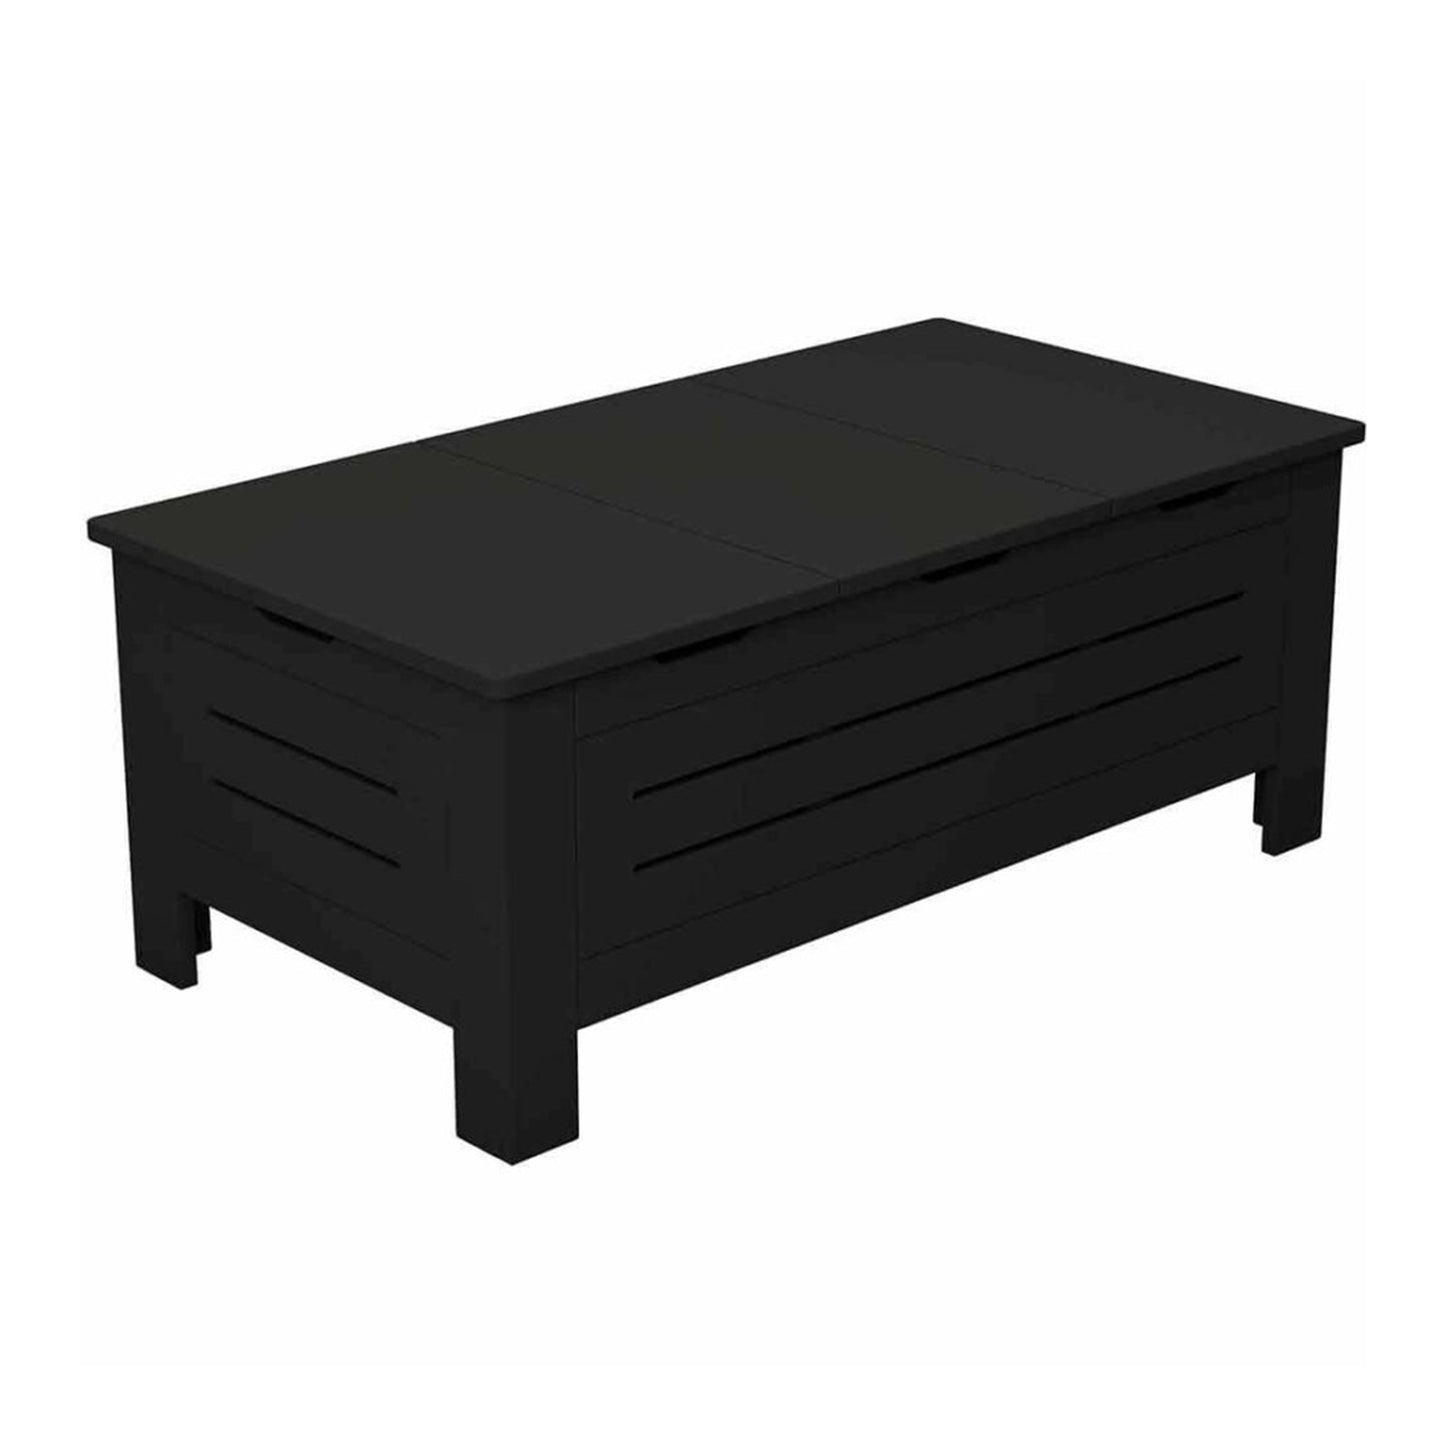 Ledge Lounger Mainstay Outdoor Storage Coffee Table